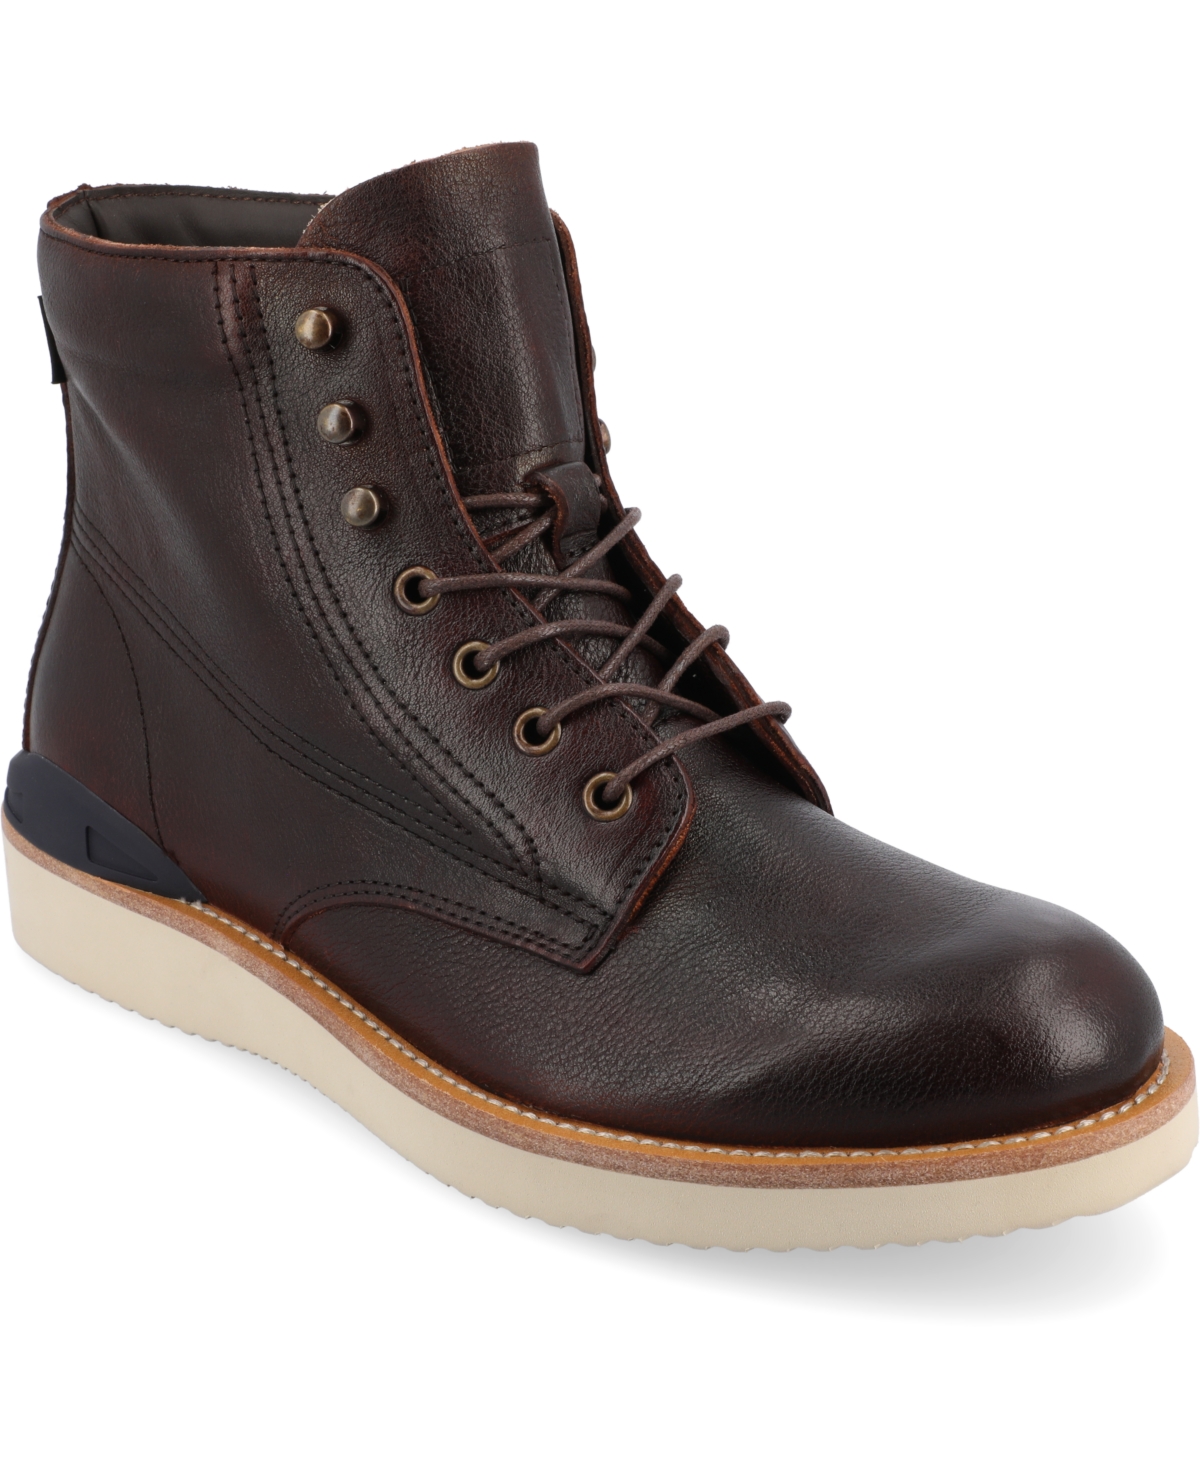 Shop Taft 365 Men's Model 004 Wedge Sole Lace-up Ankle Boots In Chili